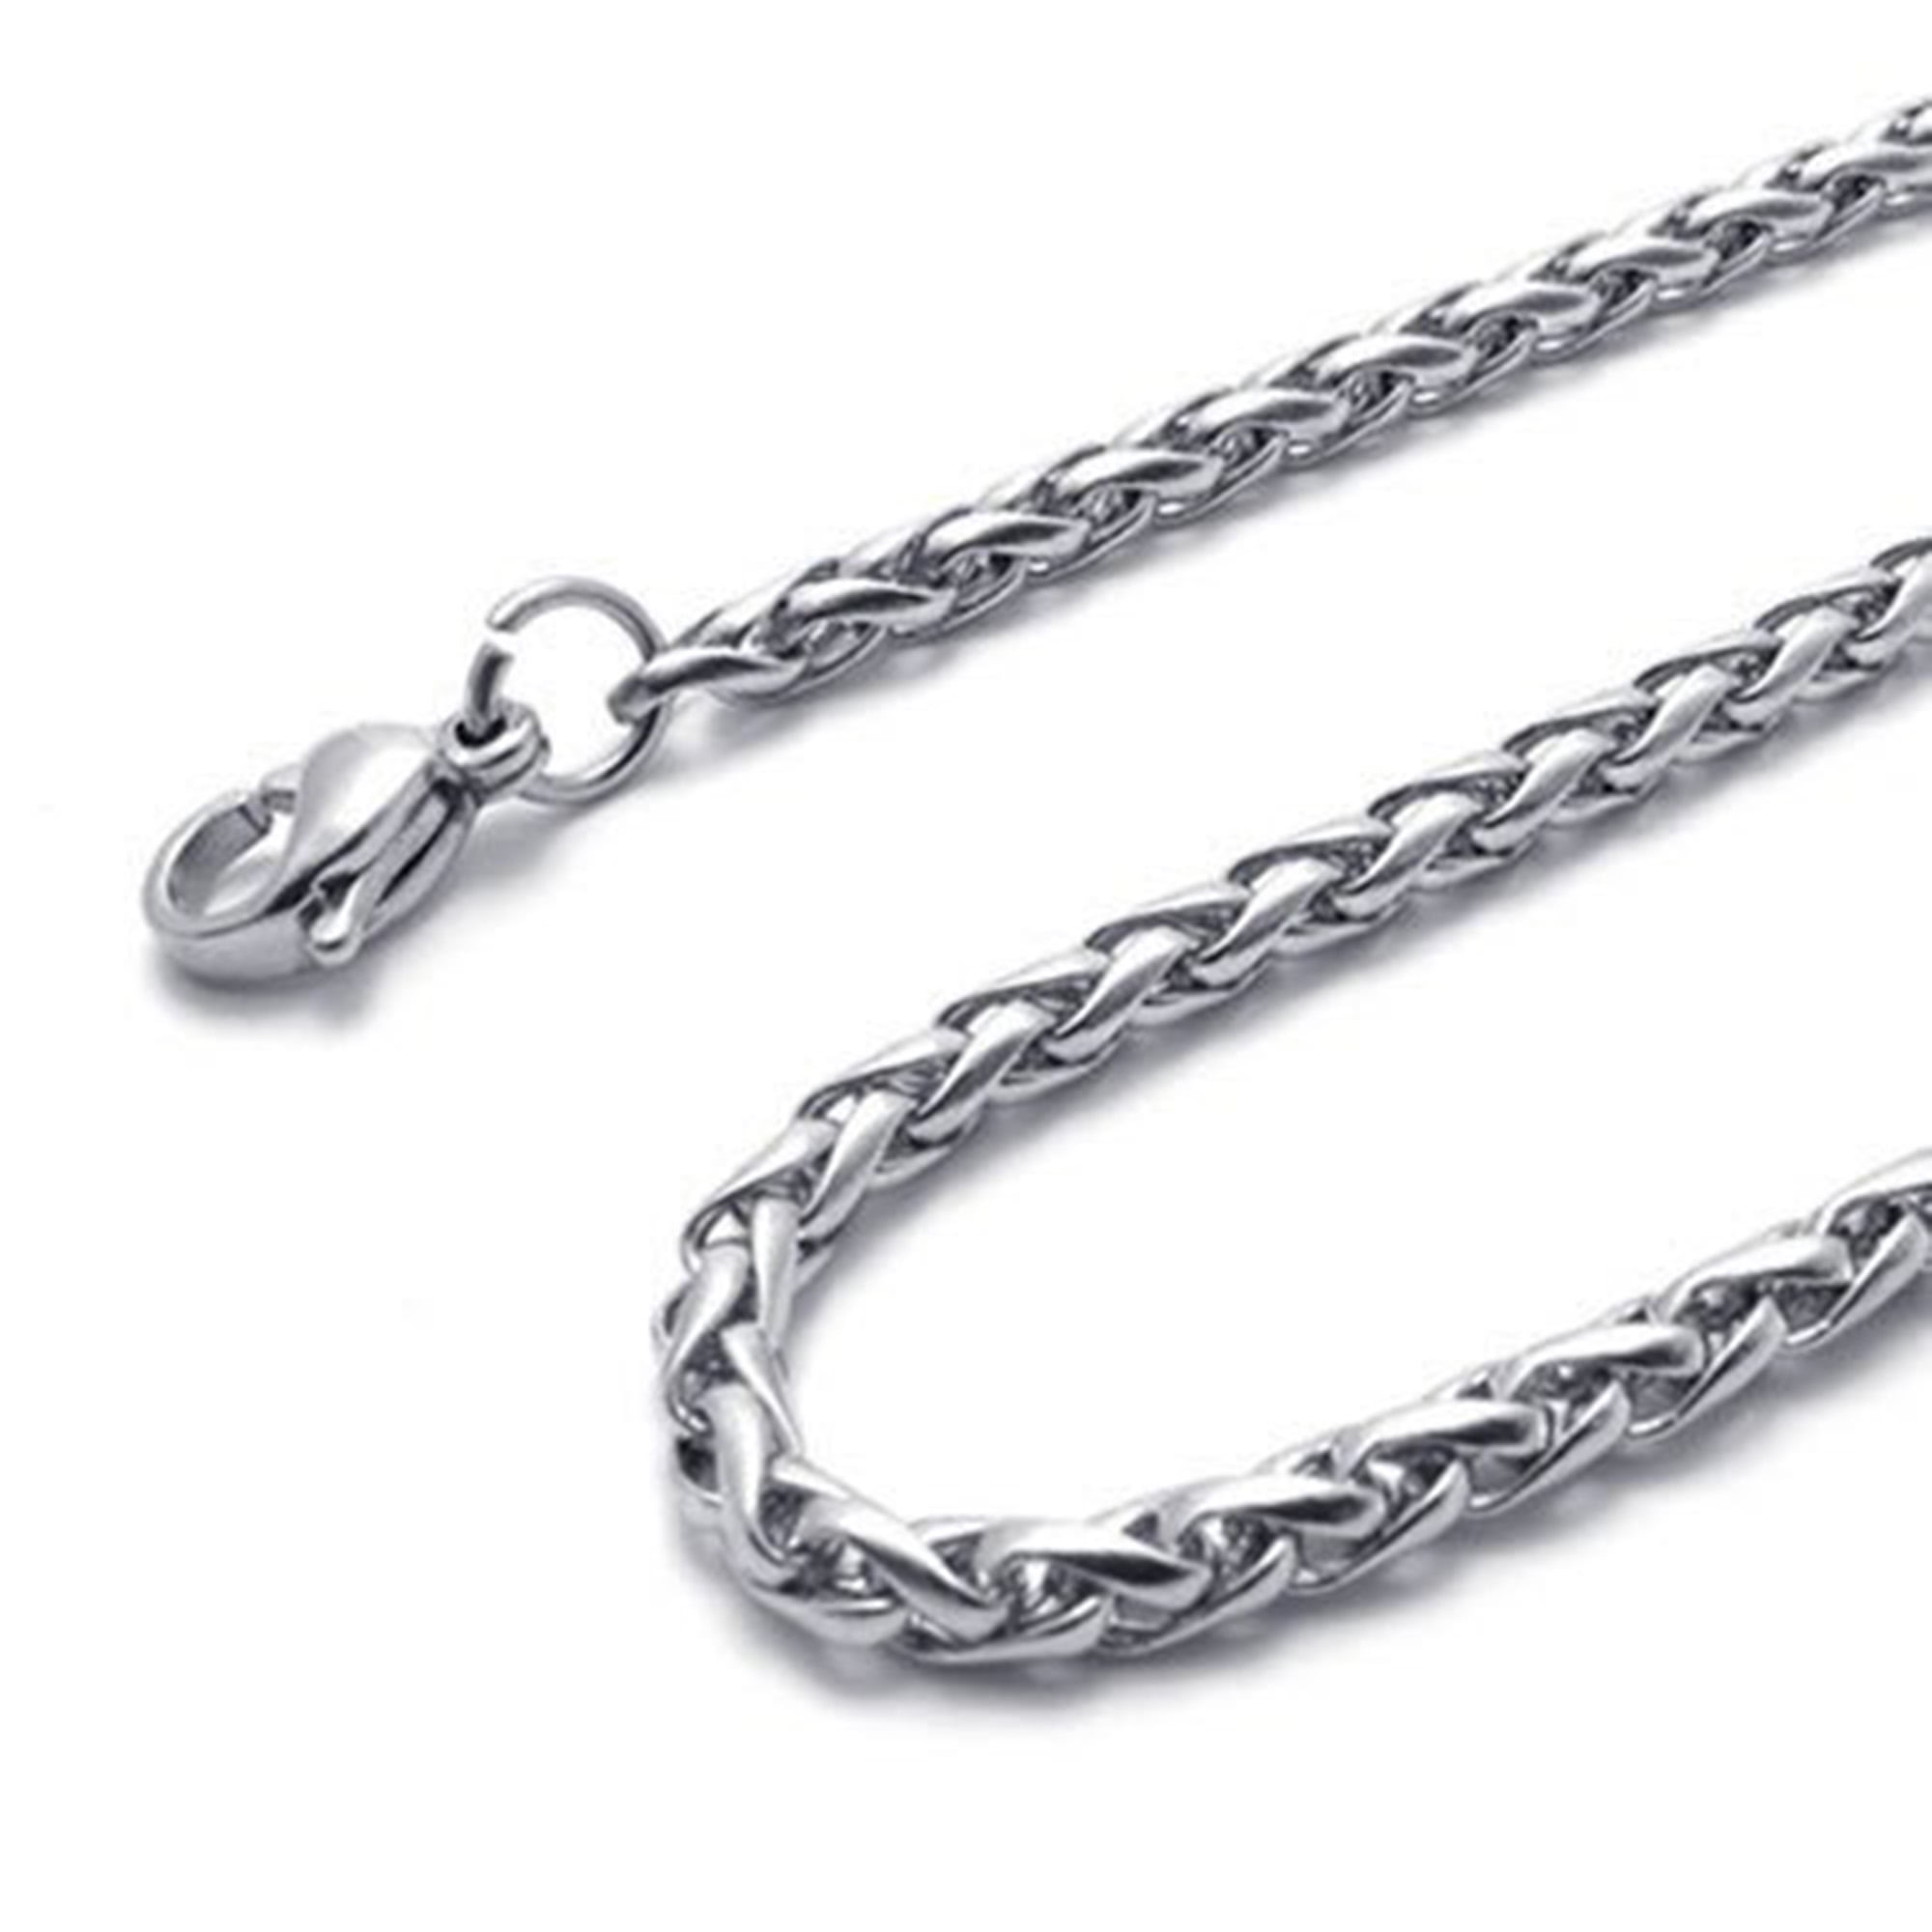 3MM 22" MENS Silver Stainless Steel Wheat Braided Chain Necklace Jewelry 